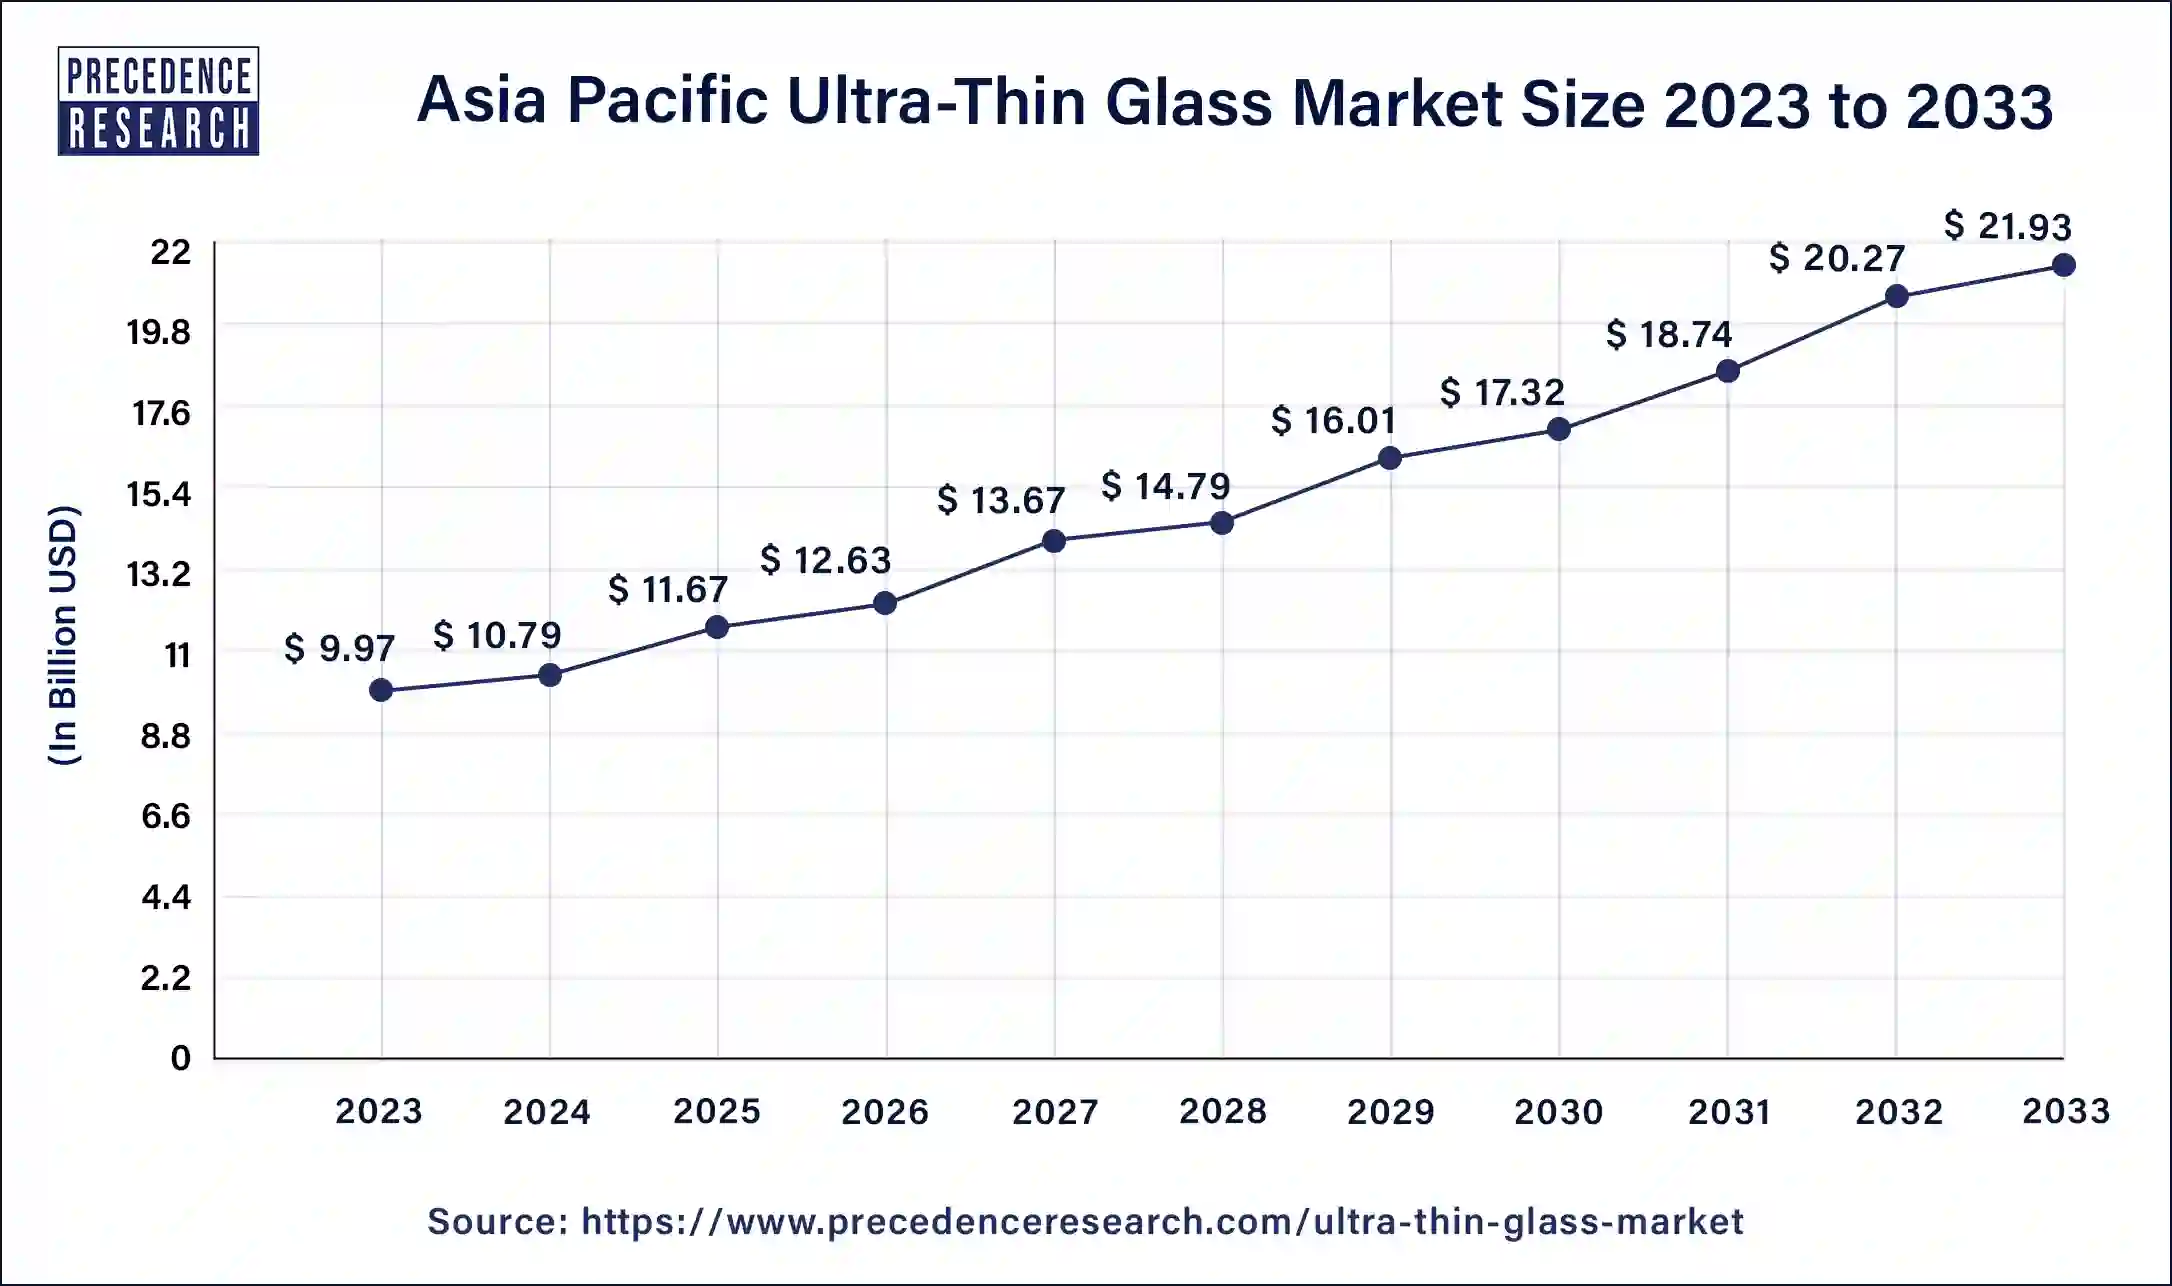 Asia Pacific Ultra-Thin Glass Market Size 2024 to 2033